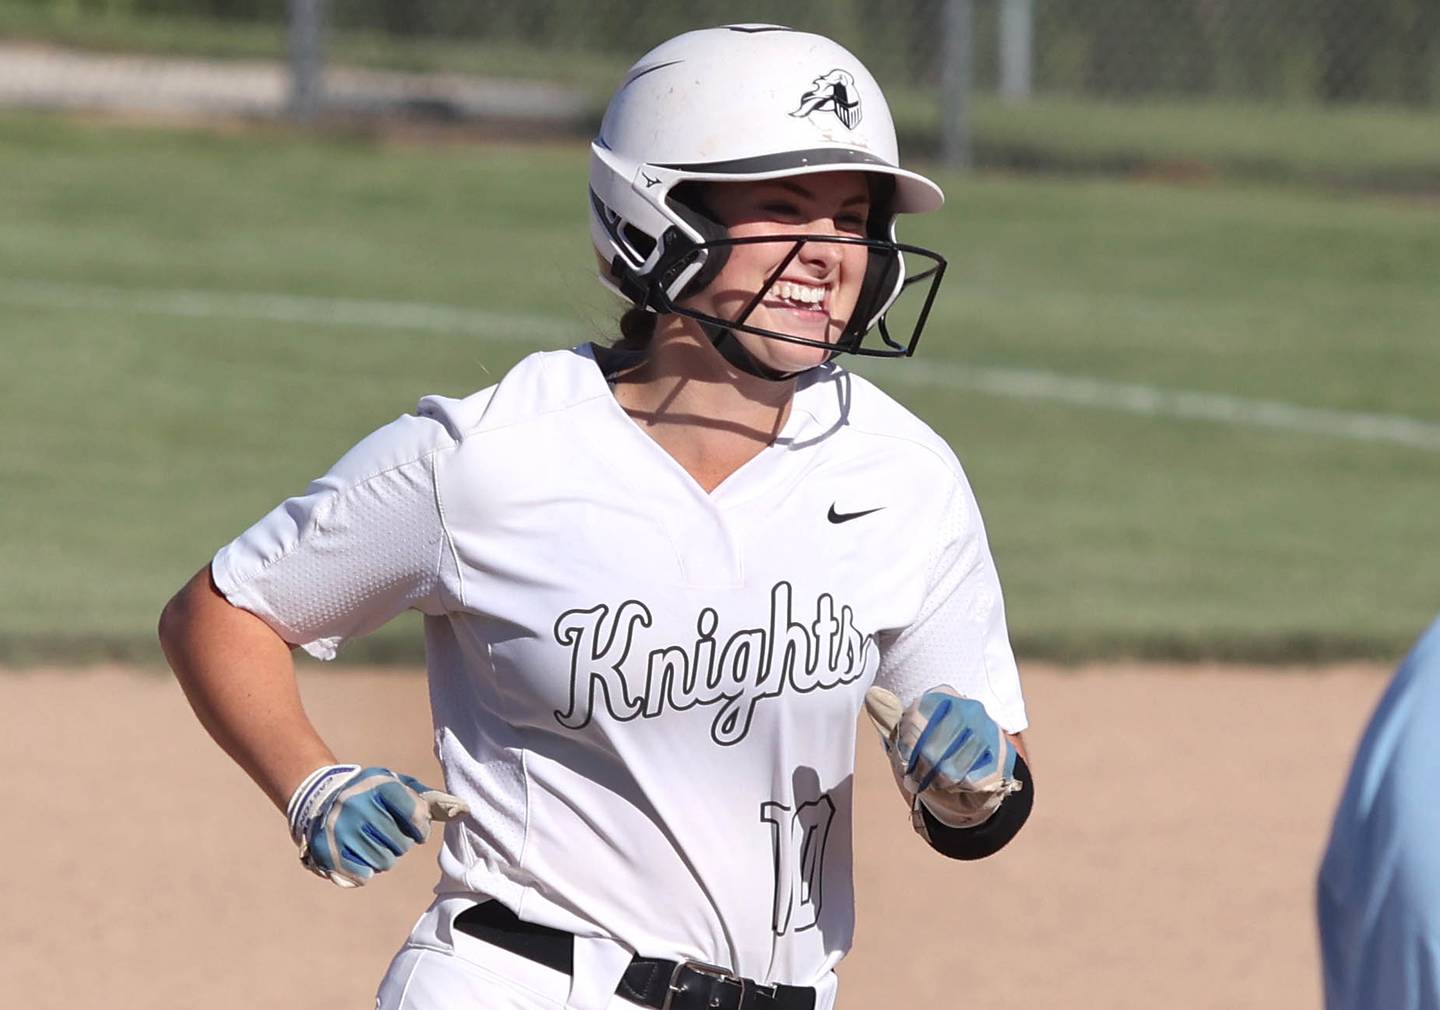 Kaneland's Emily Olp is all smiles as she rounds the bases after hitting a 3-run homer that put the Knights up 3-0 on Belvedere North Friday, June 3, 2022, during their IHSA Class 3A Sectional final game at Sycamore High School.